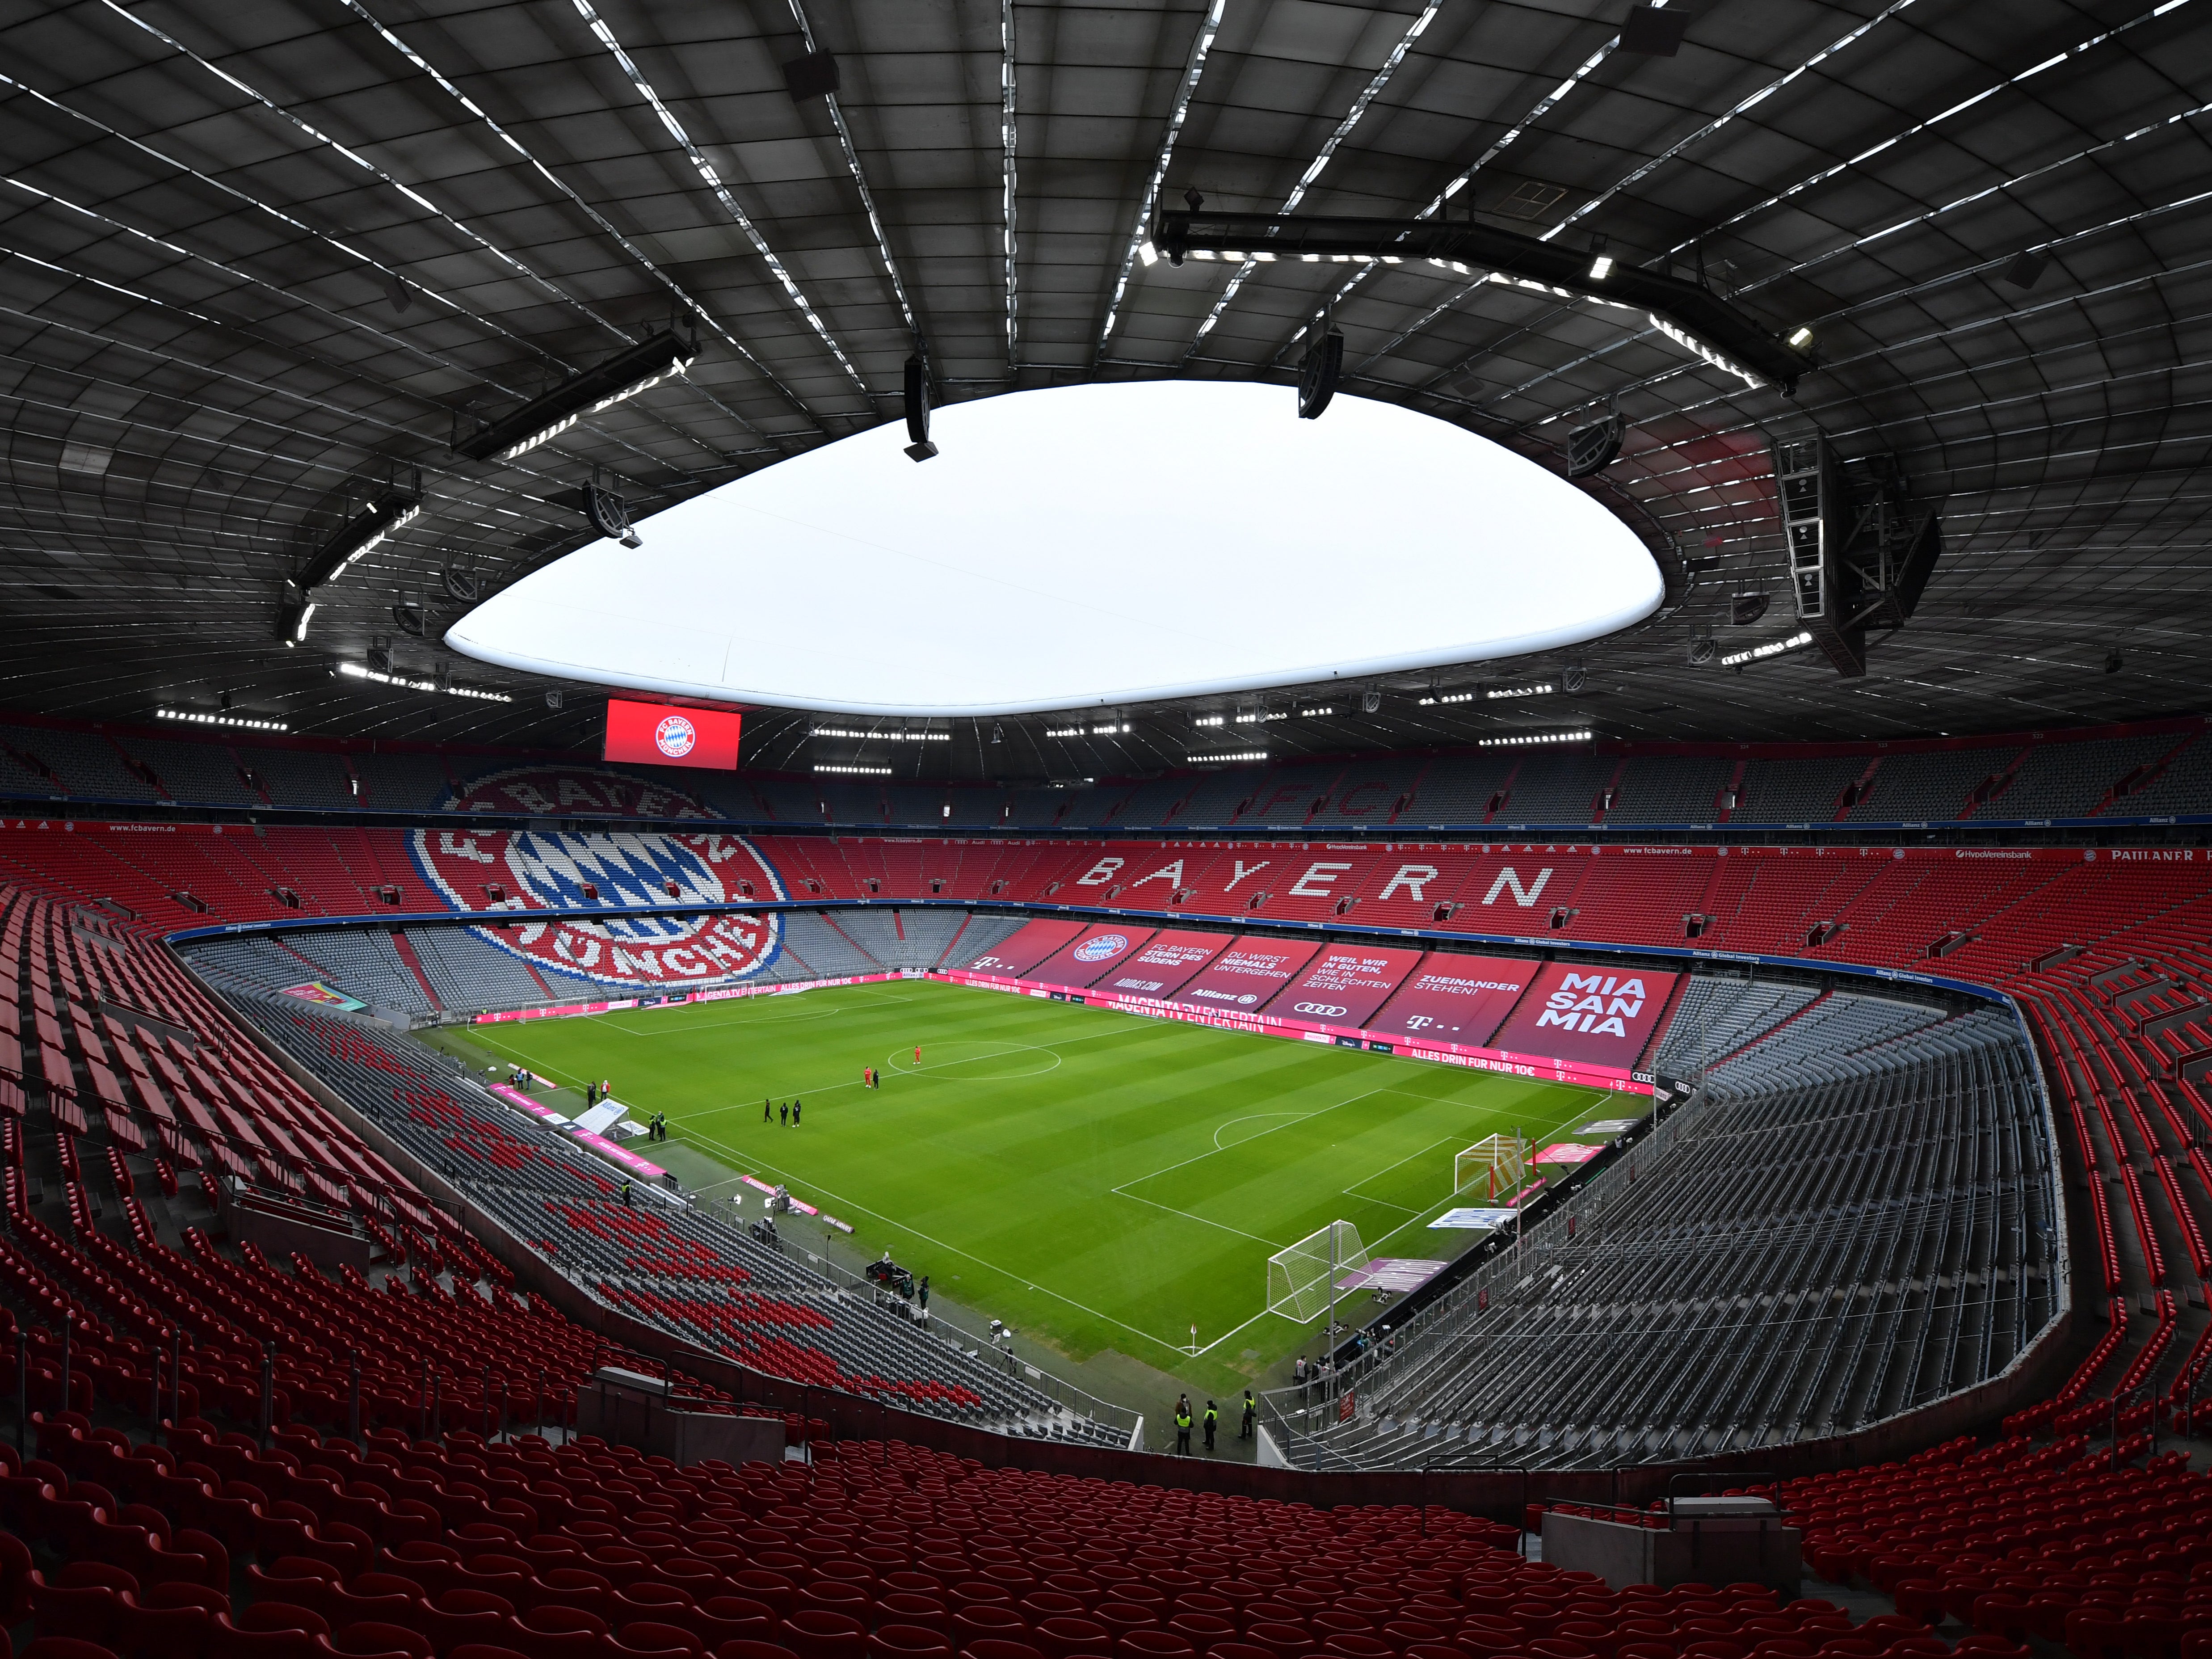 A general view from the Allianz Arena